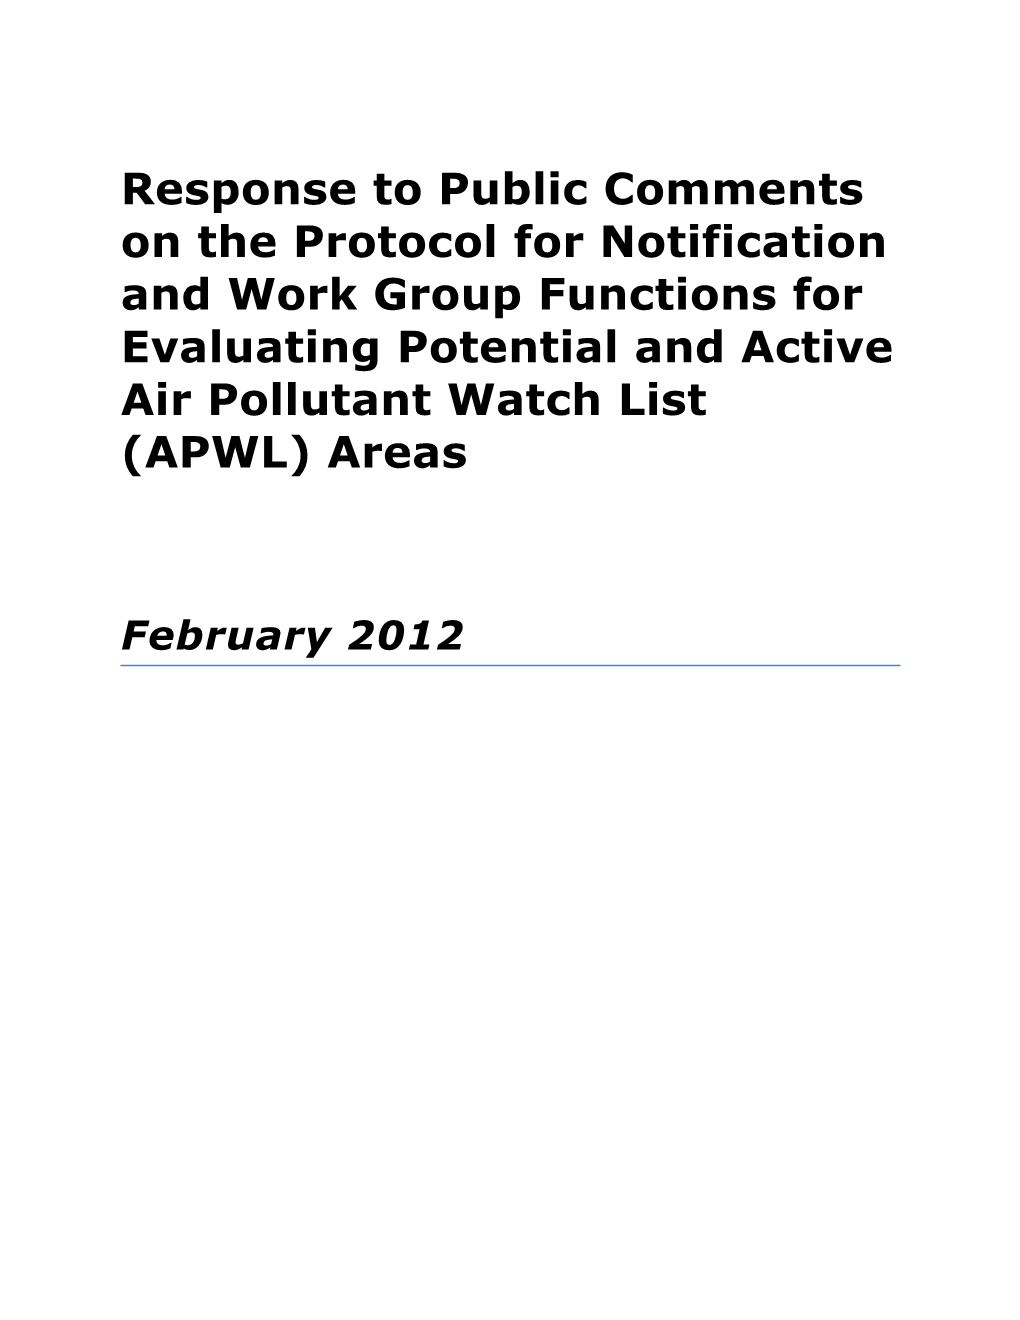 Response to Public Comments on the Protocol for Notification and Work Group Functions